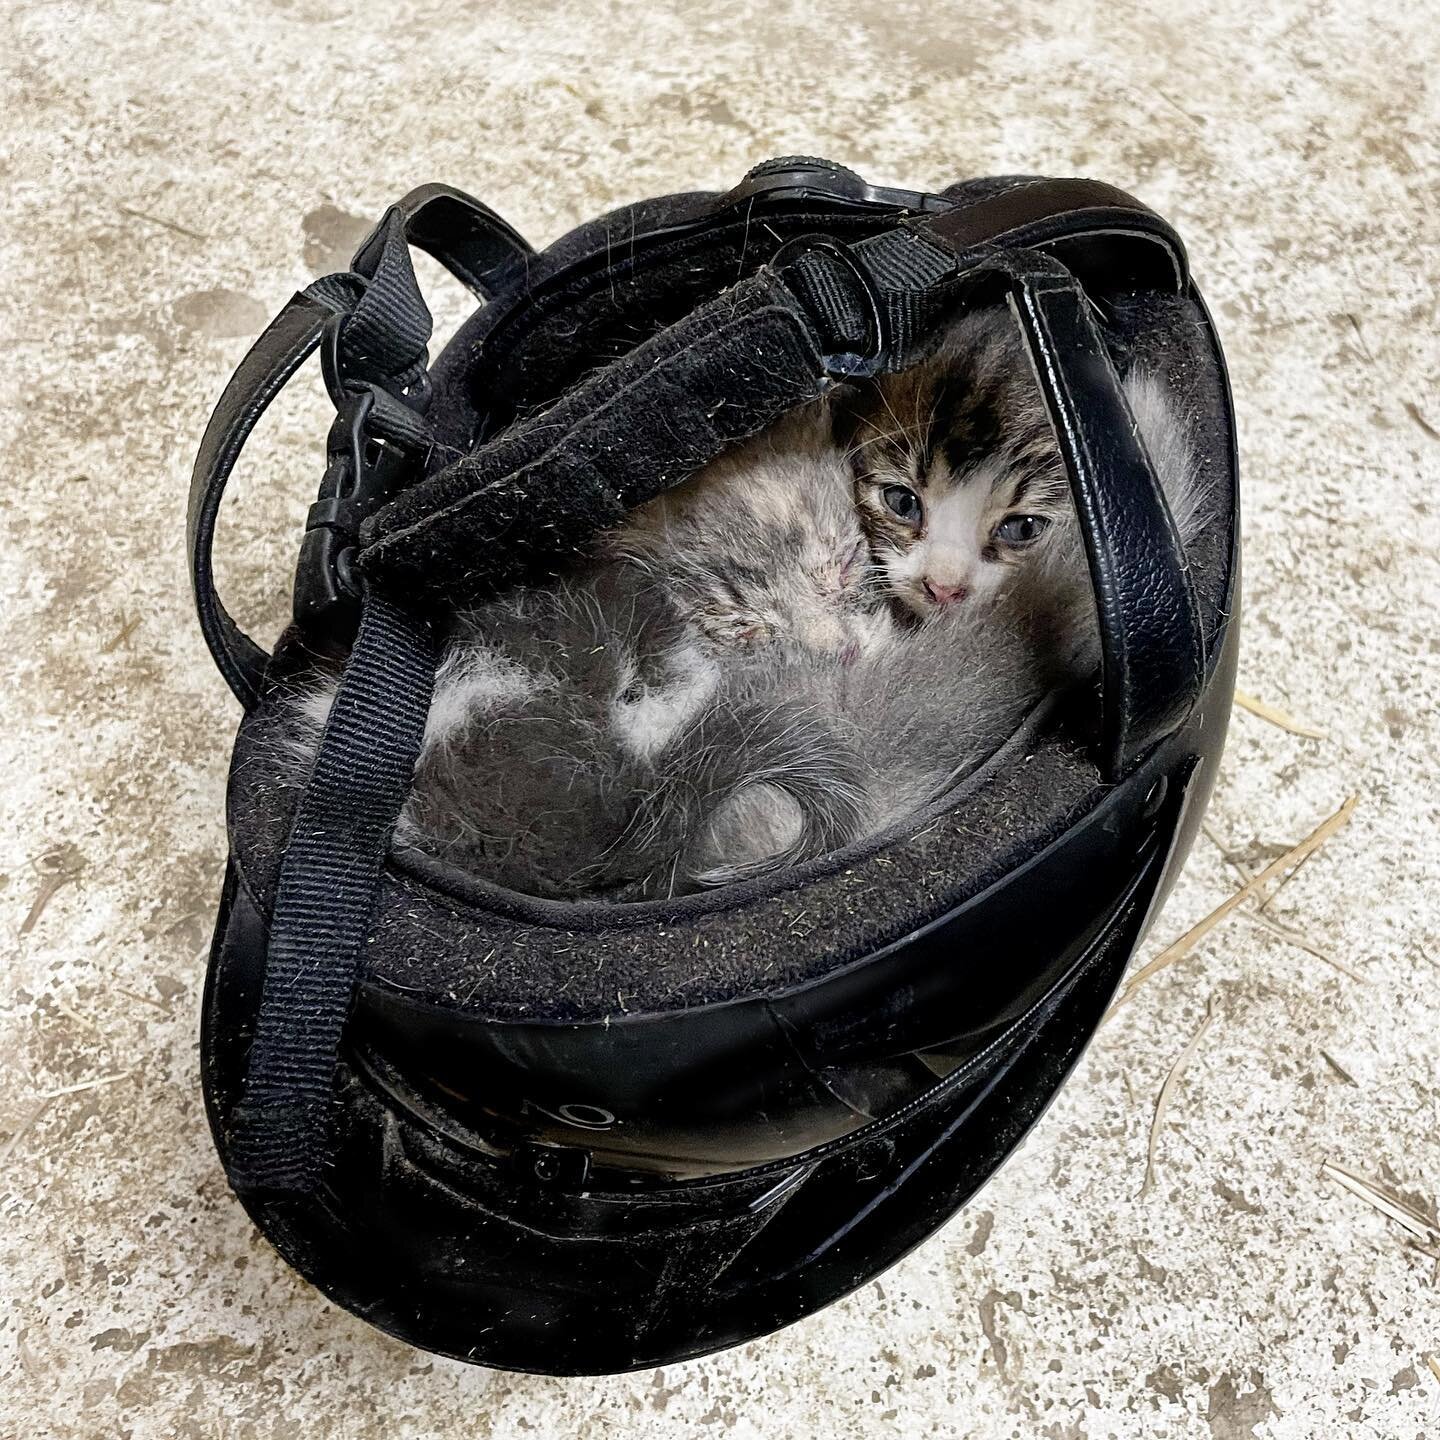 You never know when you&rsquo;ll find a riding helmet full of kittens in the Tack Room.

#DBfarms #farmkittens #familyfarming #ohioagriculture #lifeonthefarm #sheepfarming #beeffarm